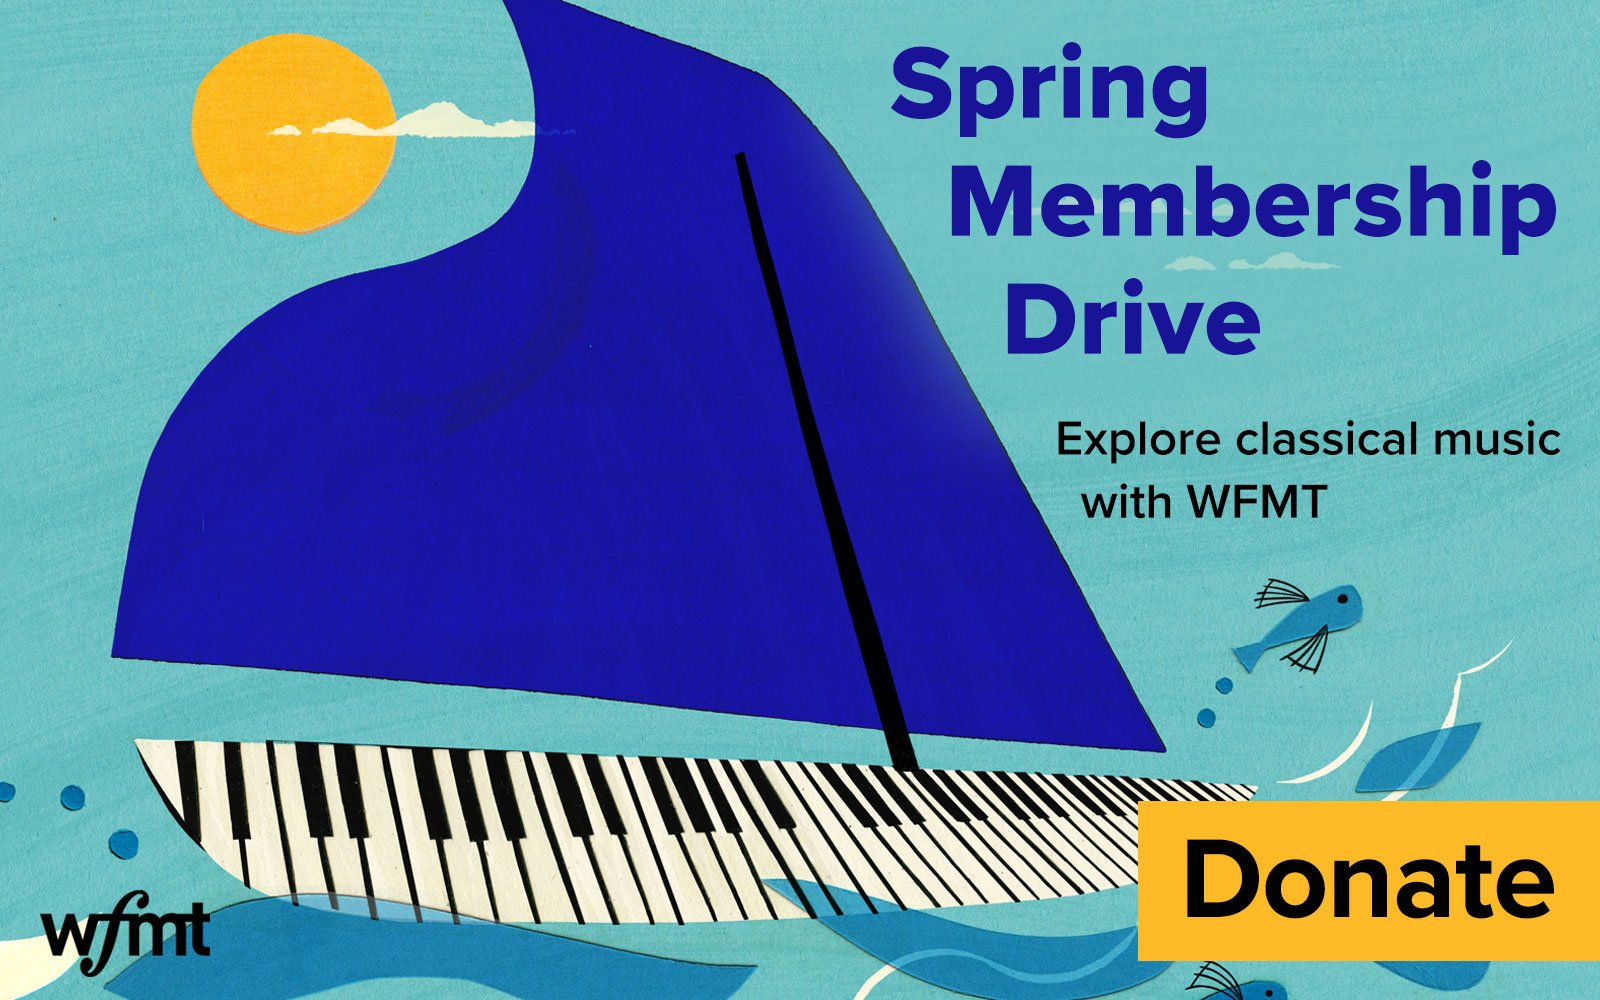 Support the spring membership drive!